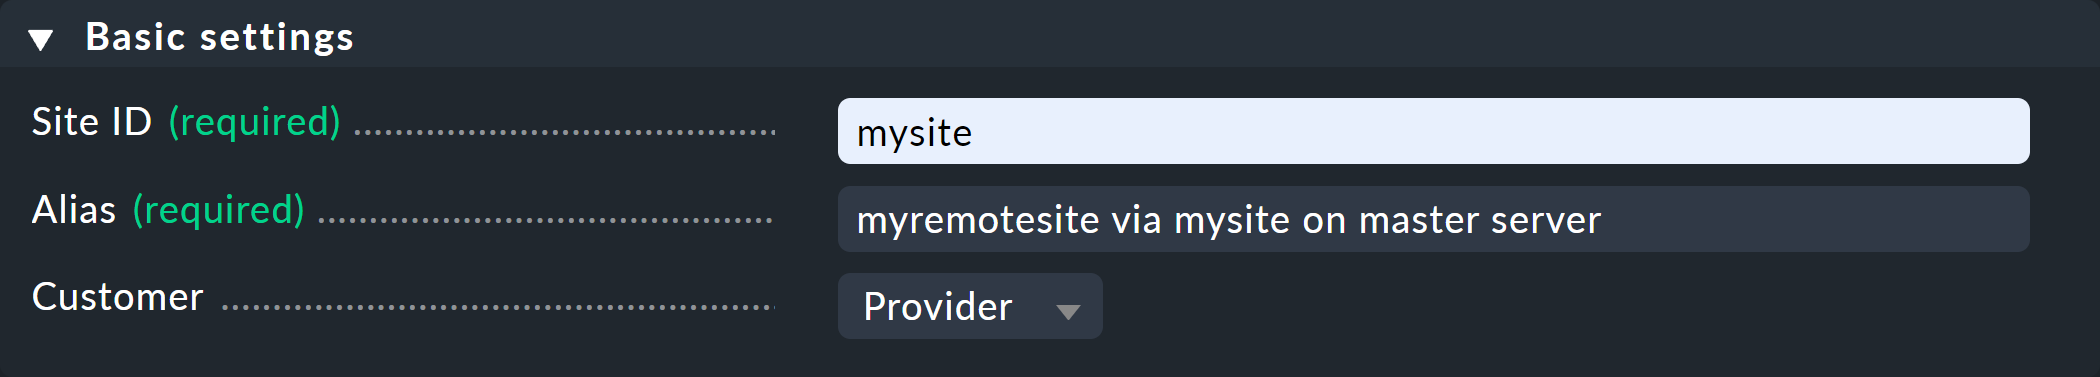 Site ID in the connection settings.